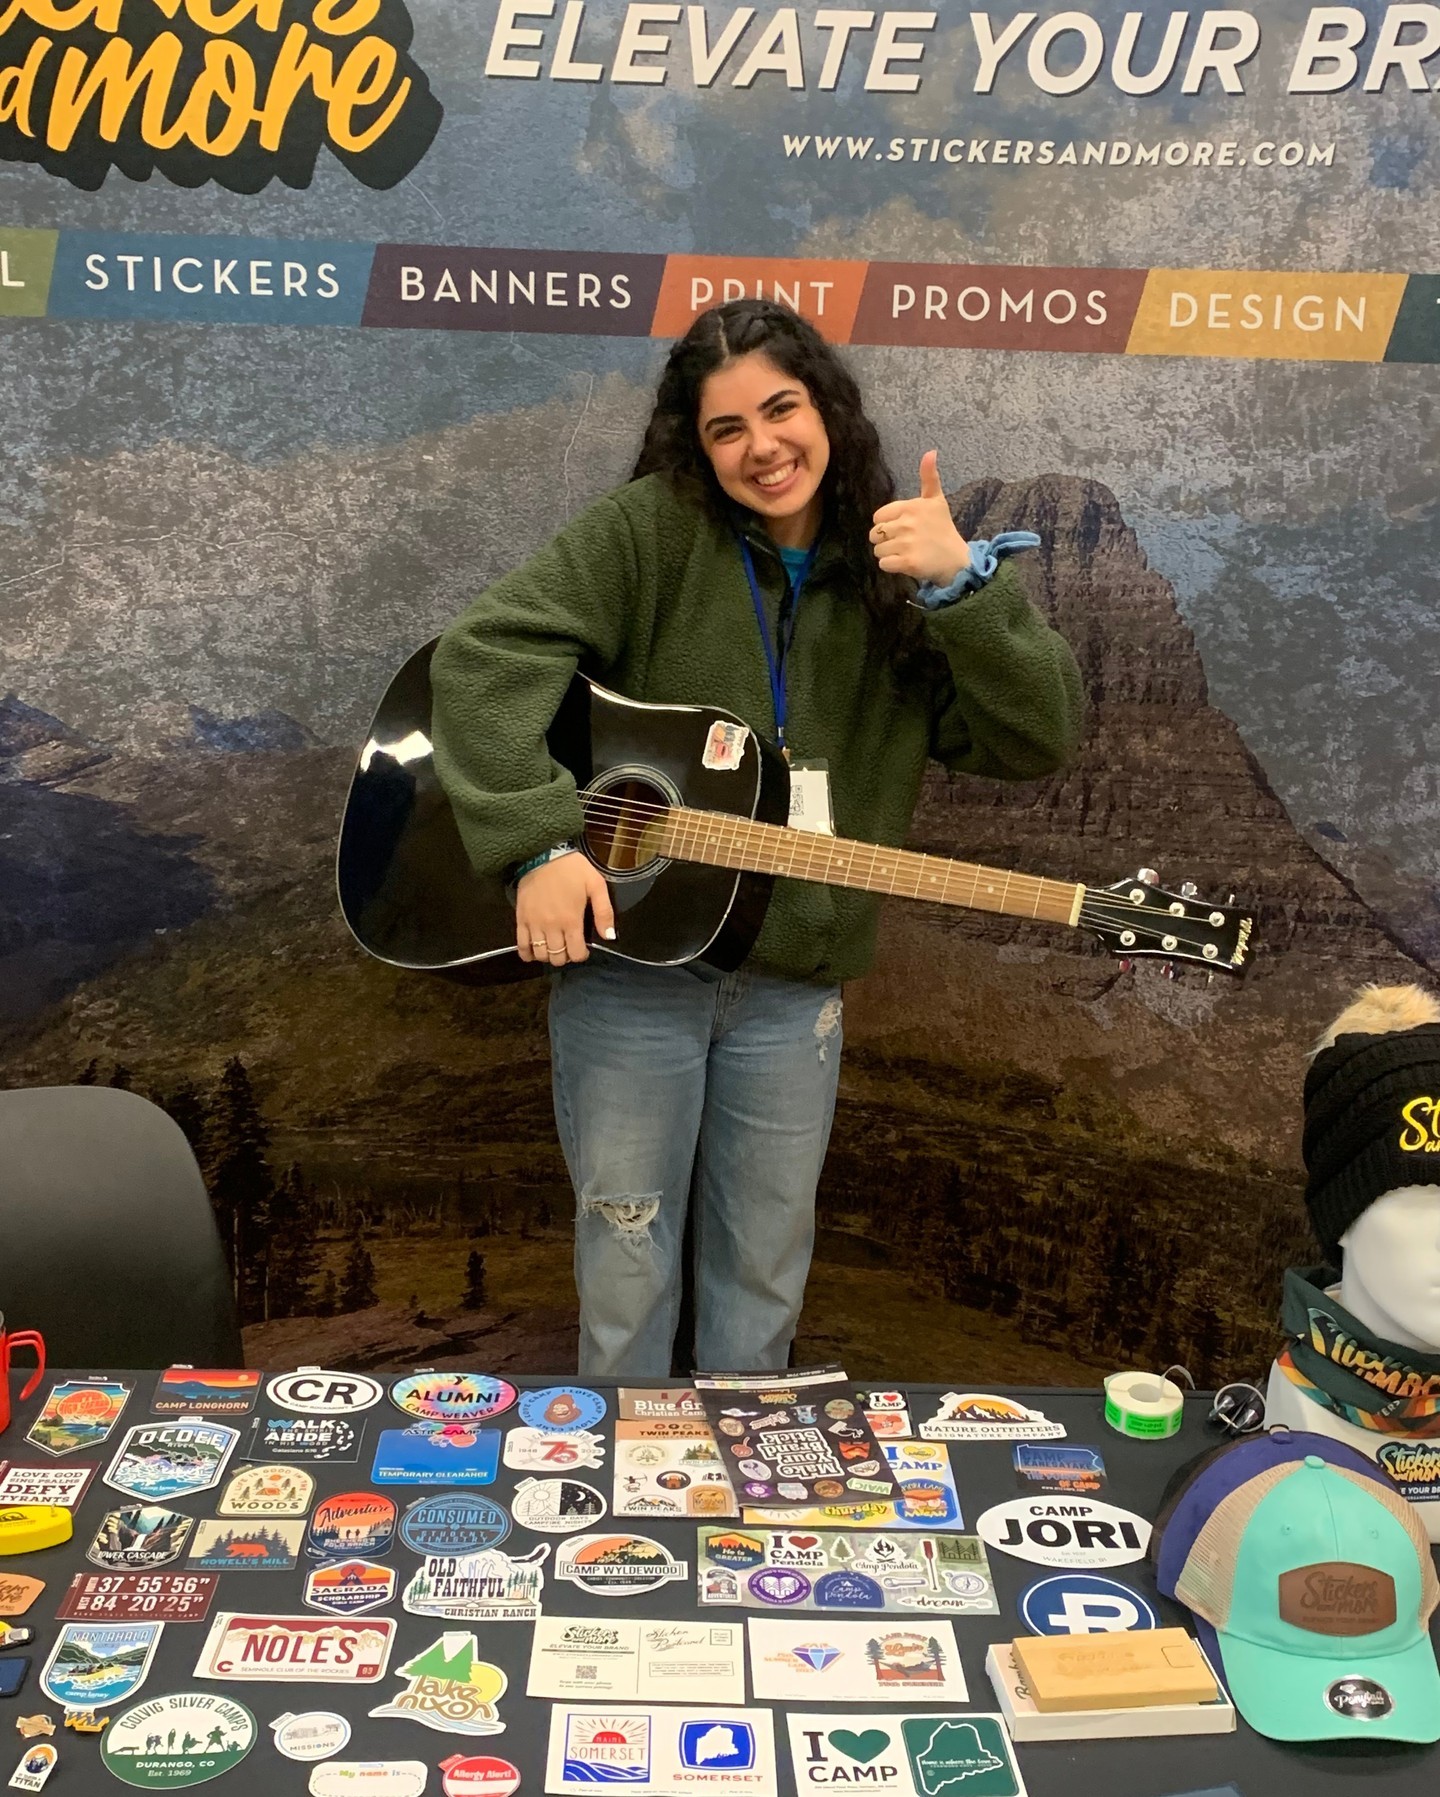 Guitar Winner at The CCCA Michigan Conference! ⭐ 🎸

Congratulations to Shanea from Lake Ann Camp! 

#StickersAndMore
#ElevateYourBrand